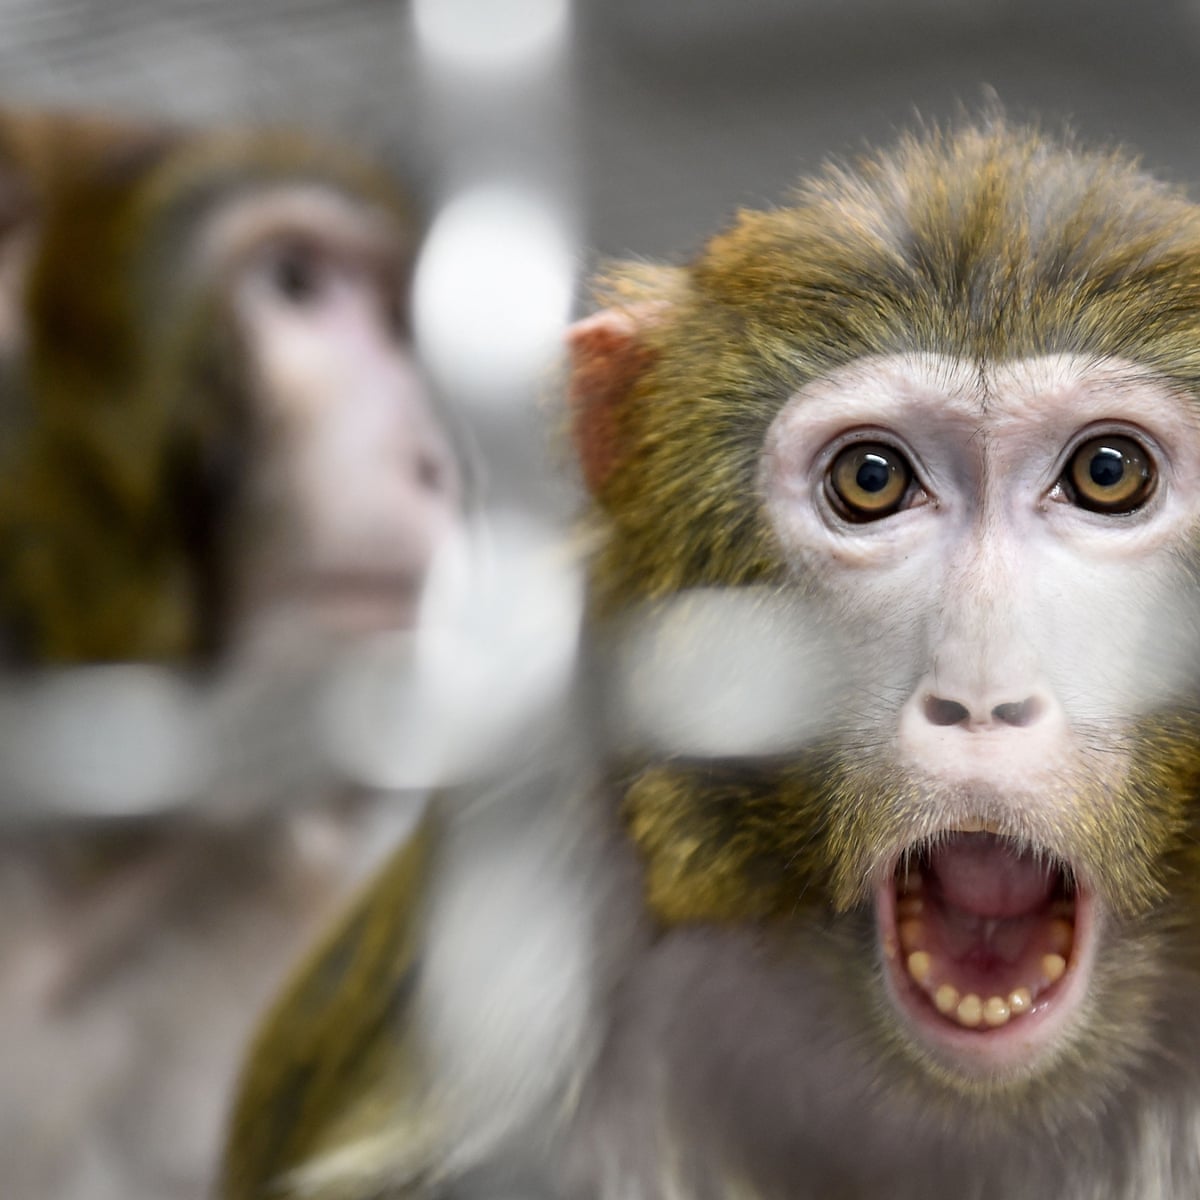 Revealed: all 27 monkeys held at Nasa research center killed on single day  in 2019 | Animals | The Guardian